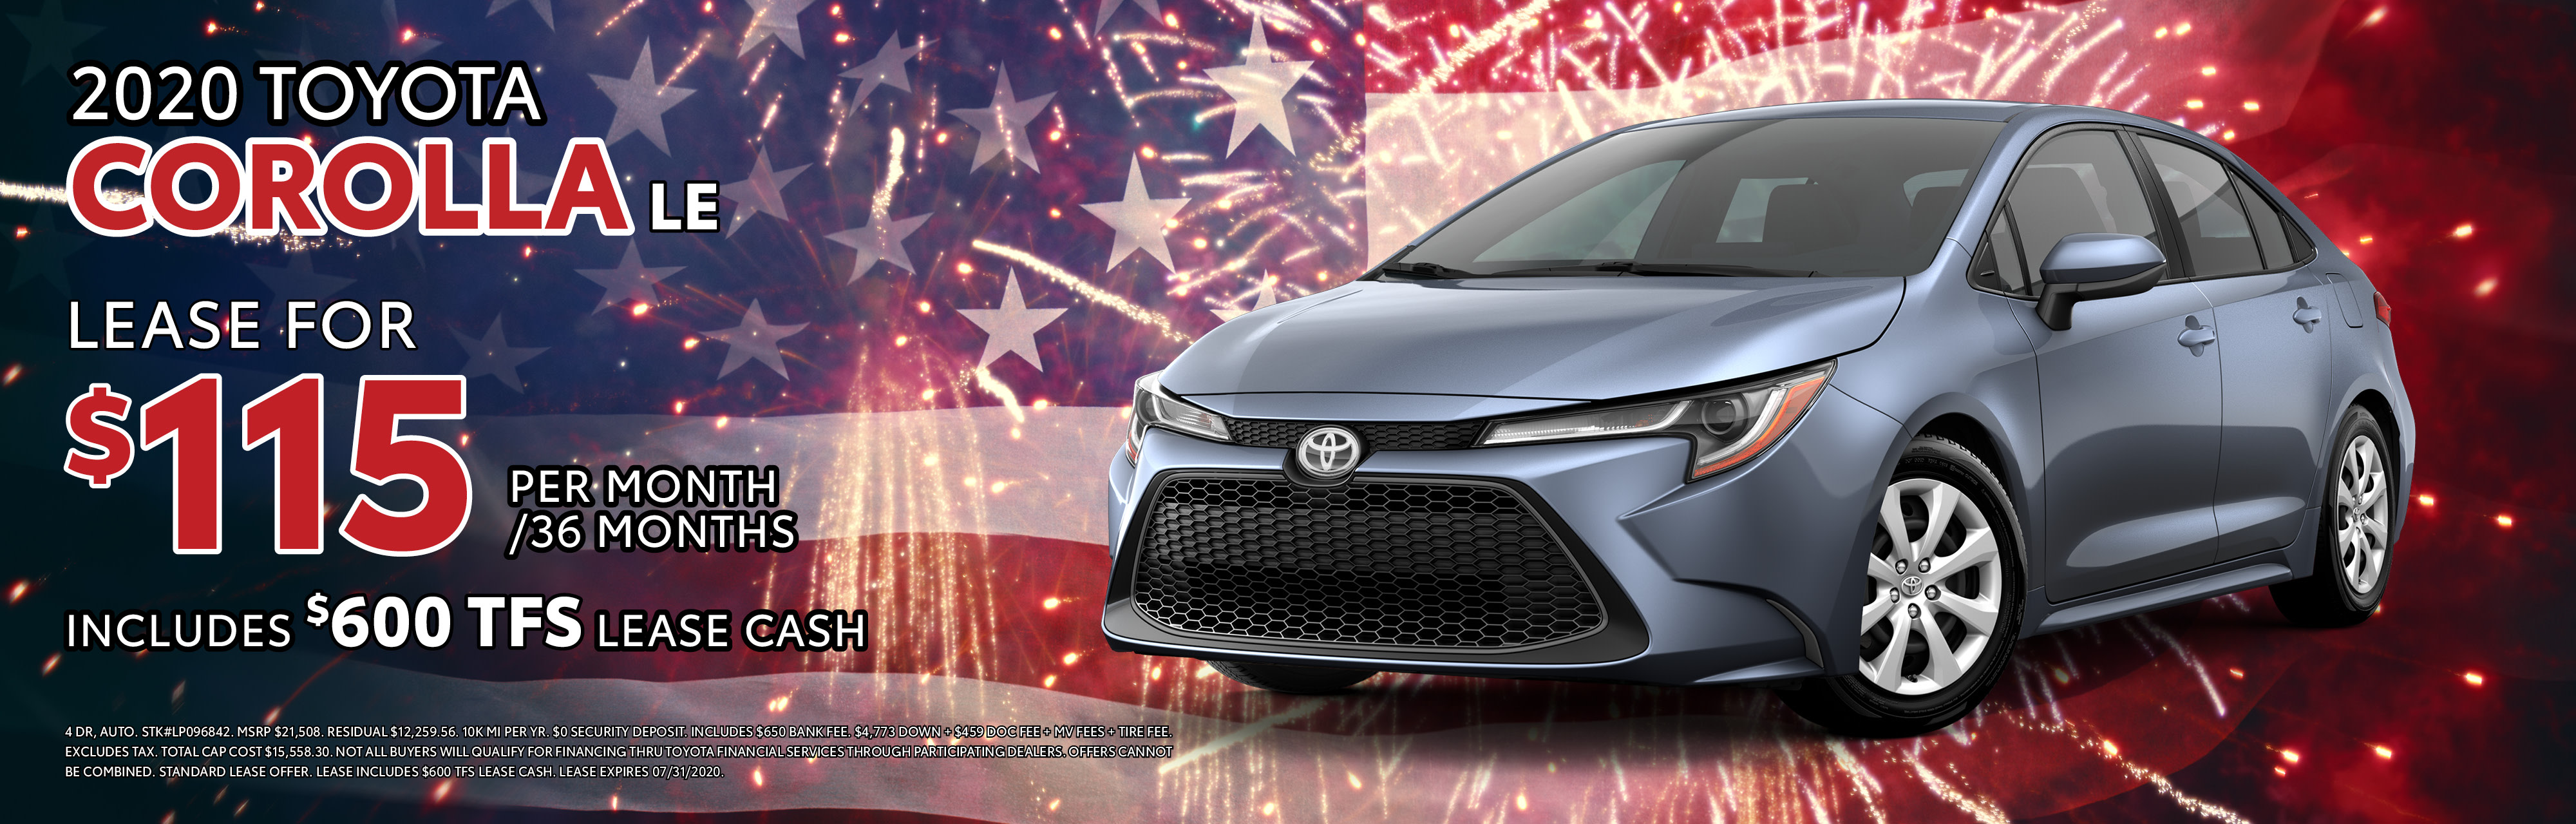 New Toyota Specials in Morristown Toyota Incentives Near Me